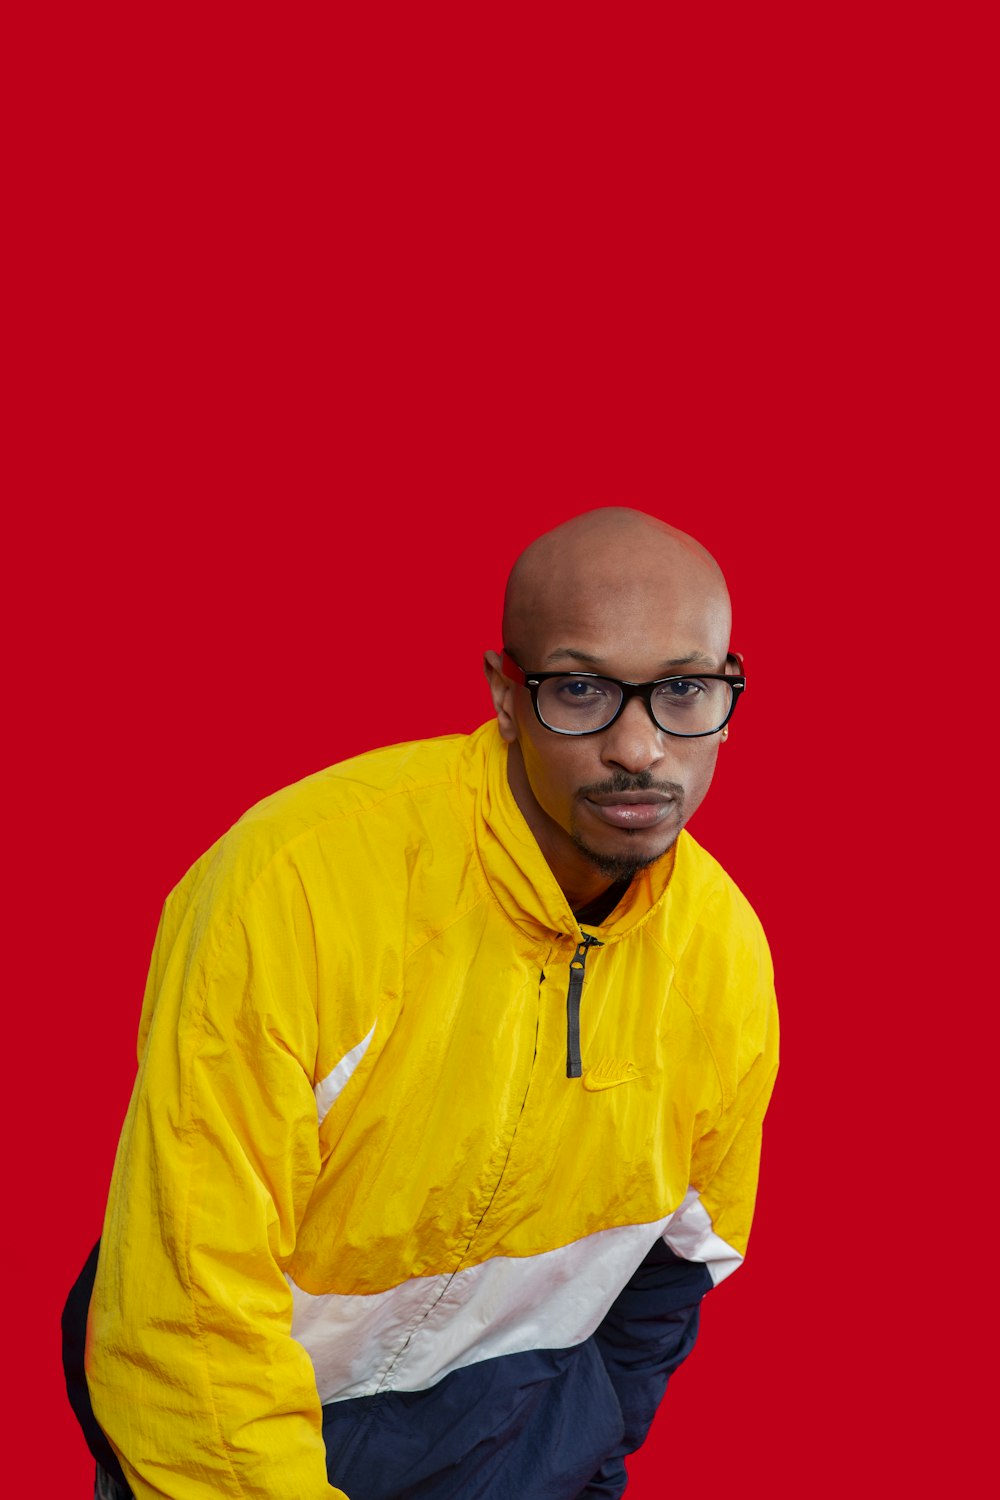 a man with a bald head wearing a yellow jacket